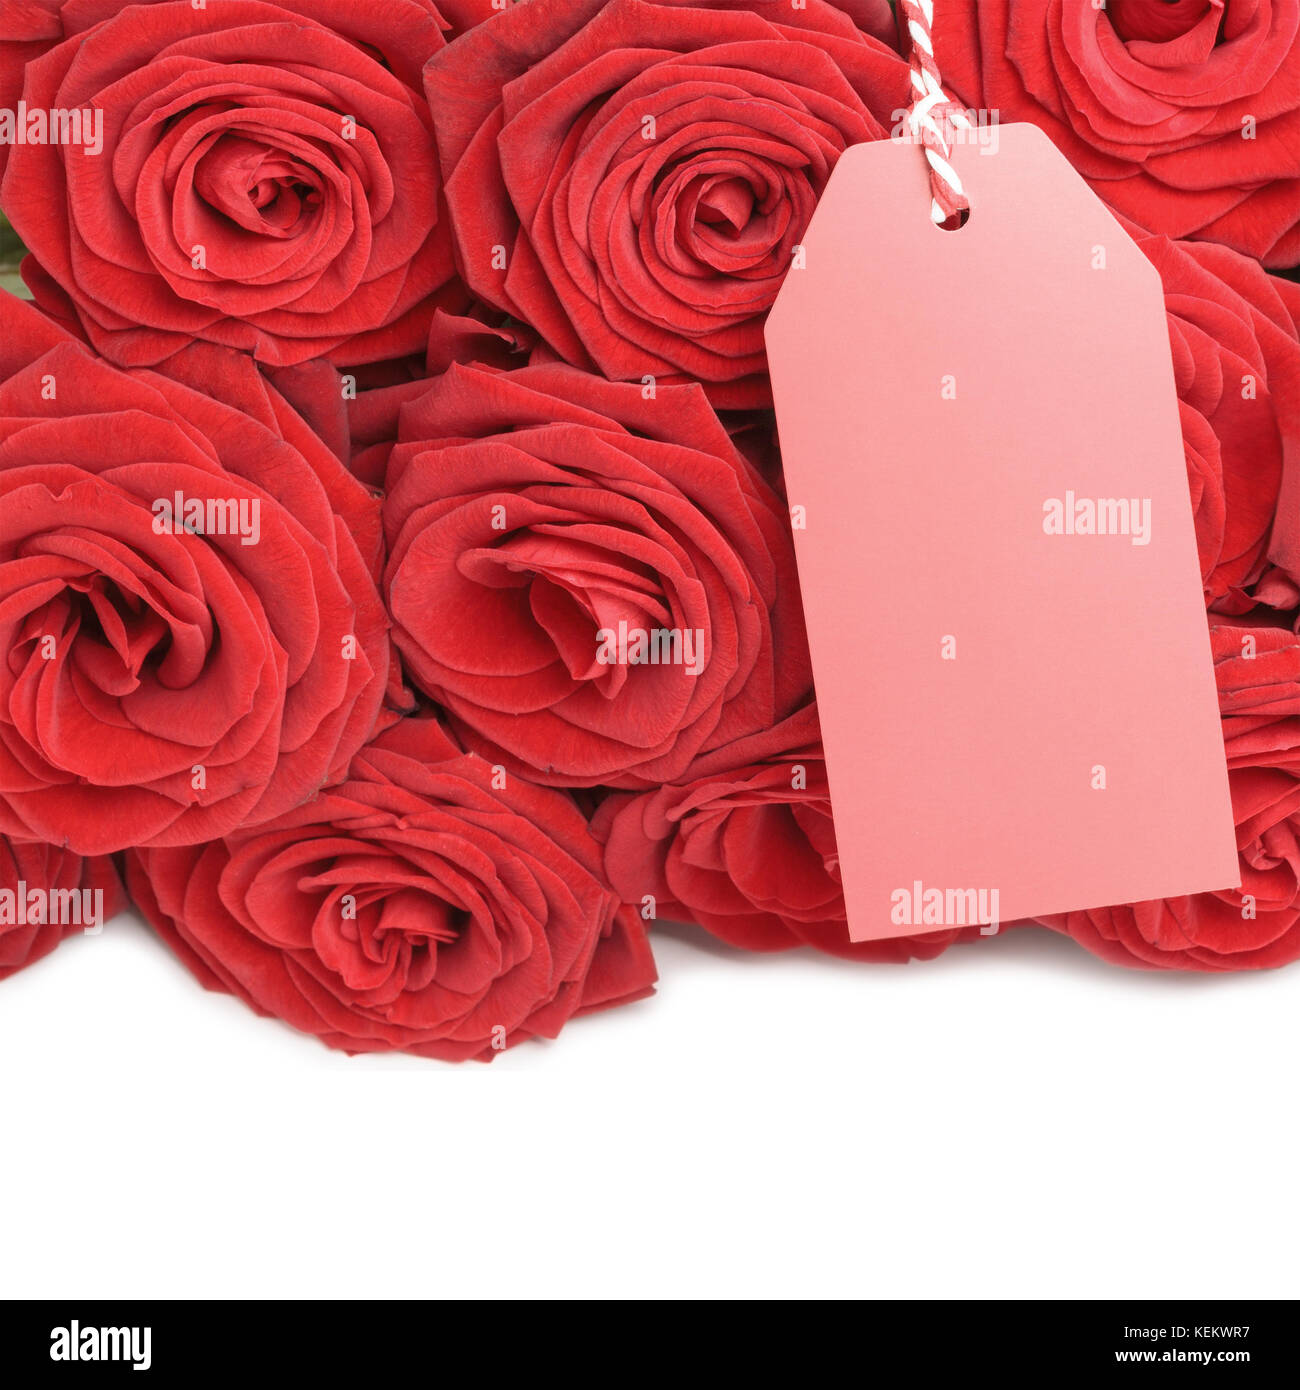 Blank card with roses  Stock Photo